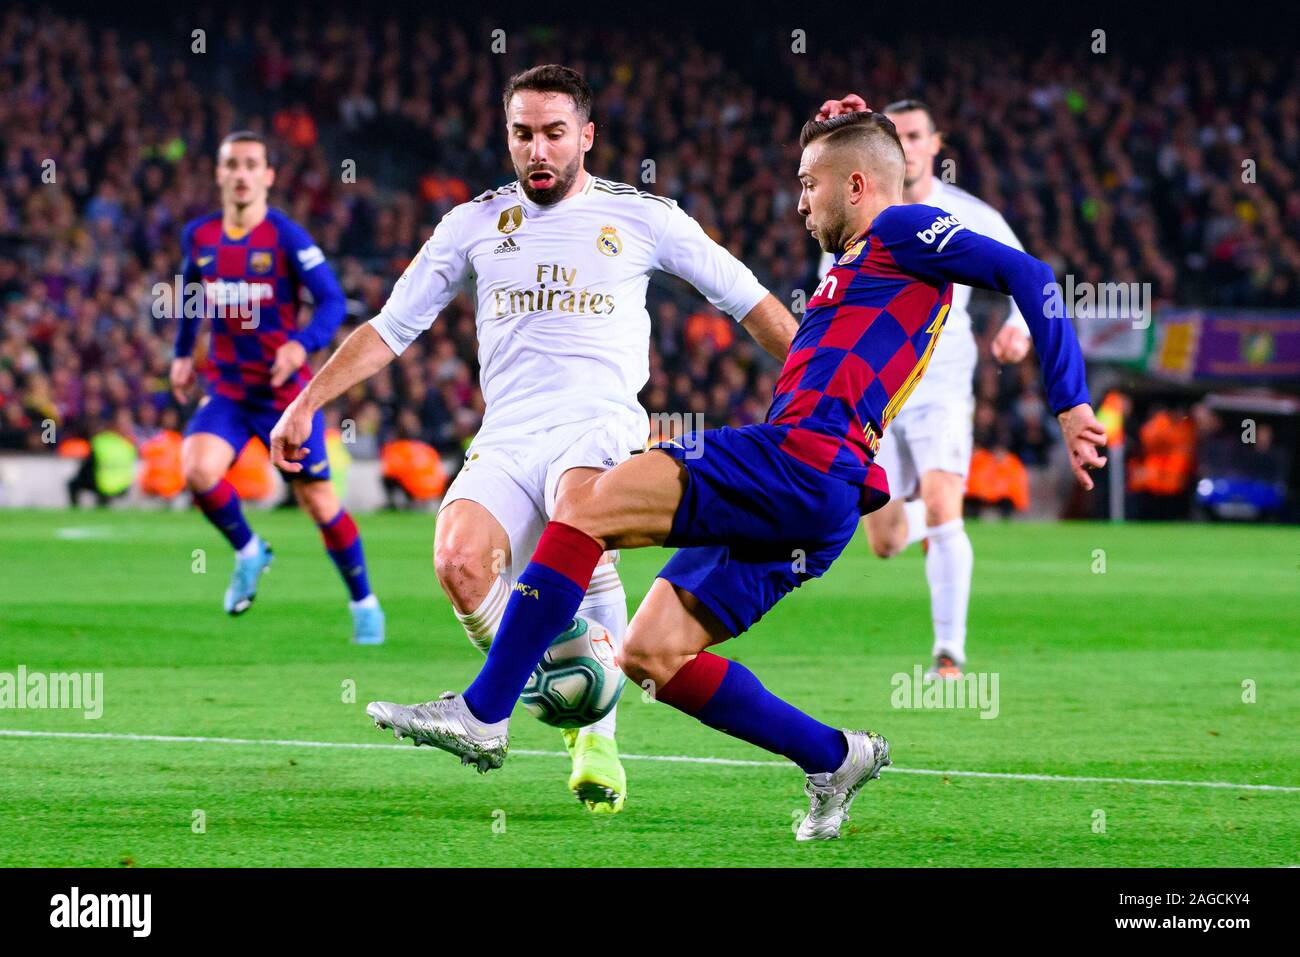 Barcelona, Spain. 18th Dec, 2019. Carvajal (L) and Jordi Alba (R) play during the La Liga match between FC Barcelona and Real Madrid CF at the Camp Nou Stadium in Barcelona, Spain. Credit: Christian Bertrand/Alamy Live News Stock Photo